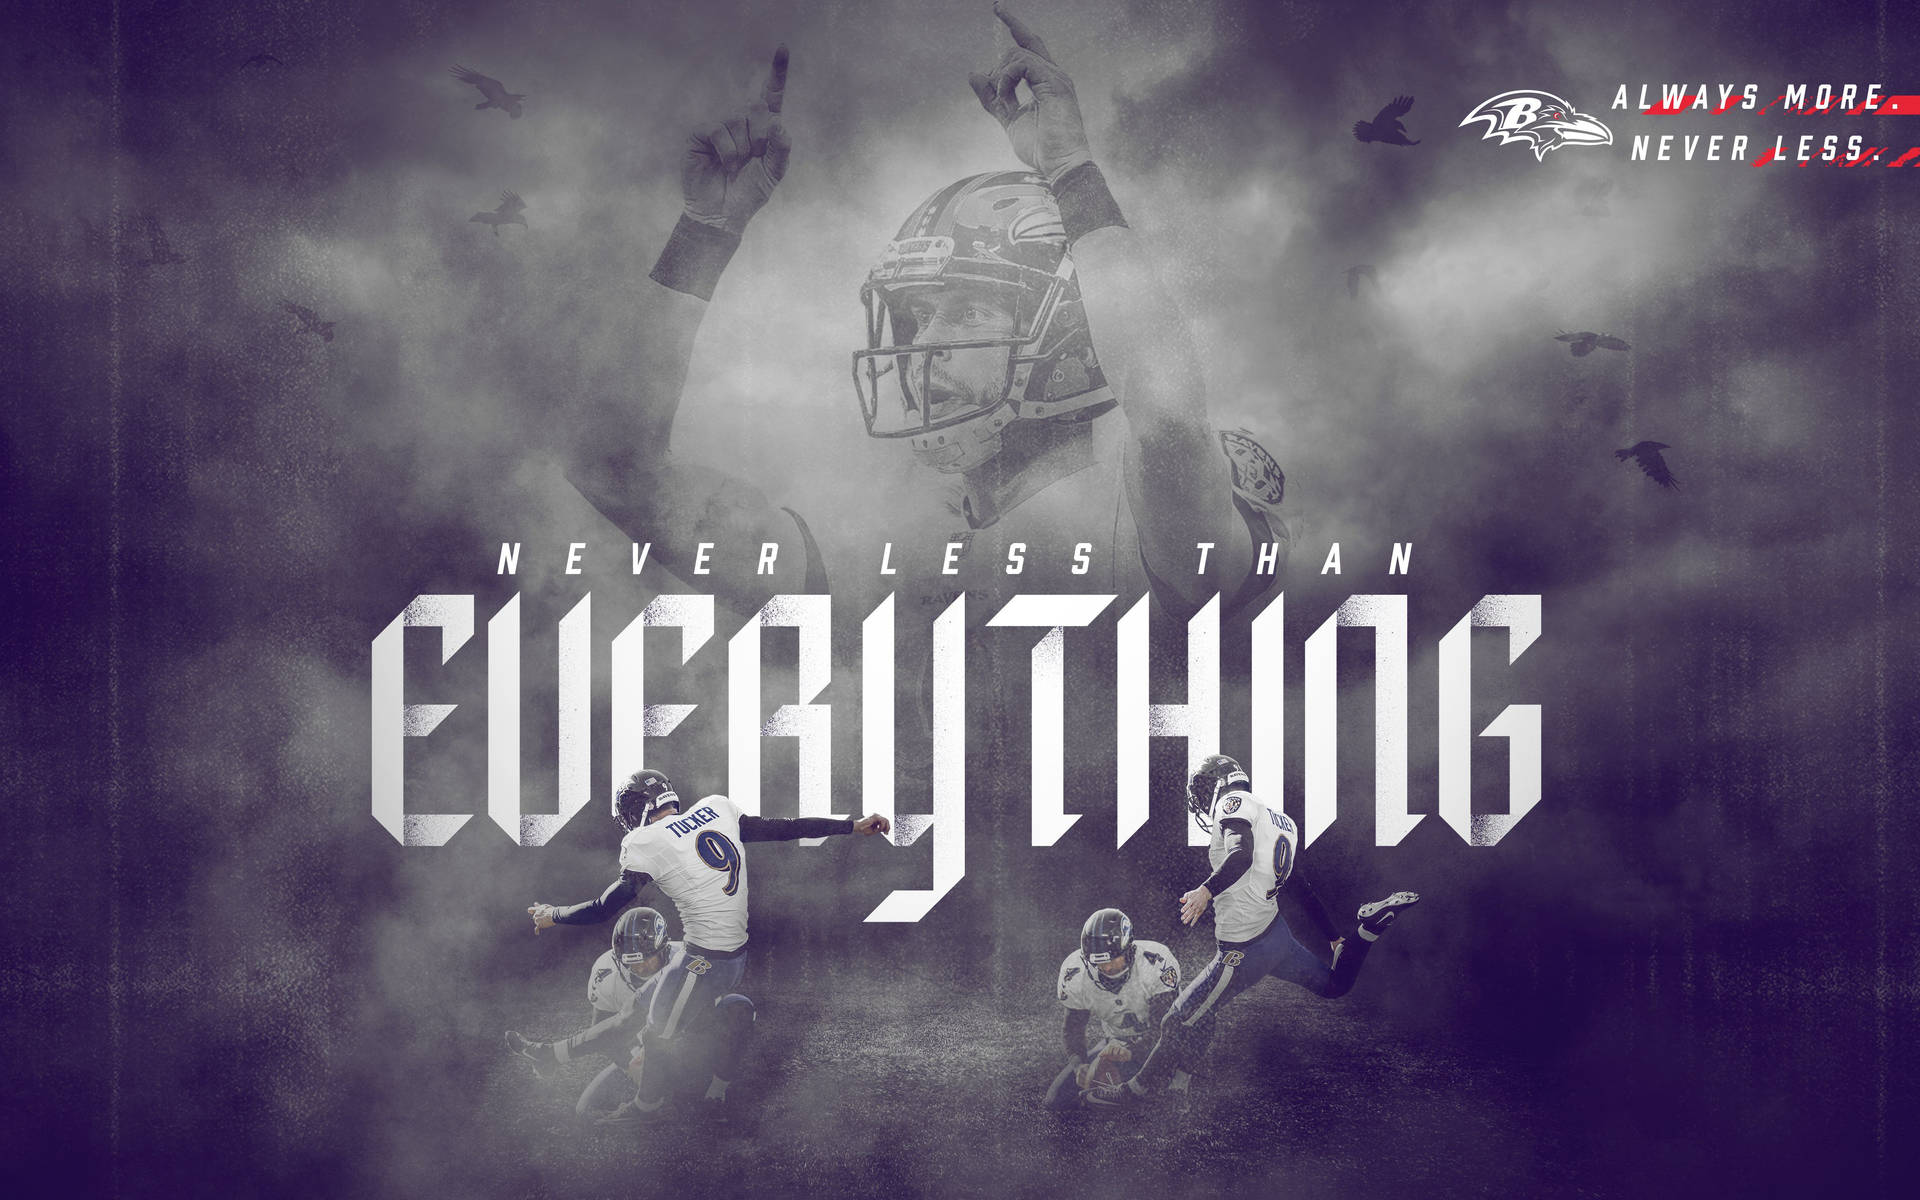 The Baltimore Ravens are Ready to Take Flight Wallpaper